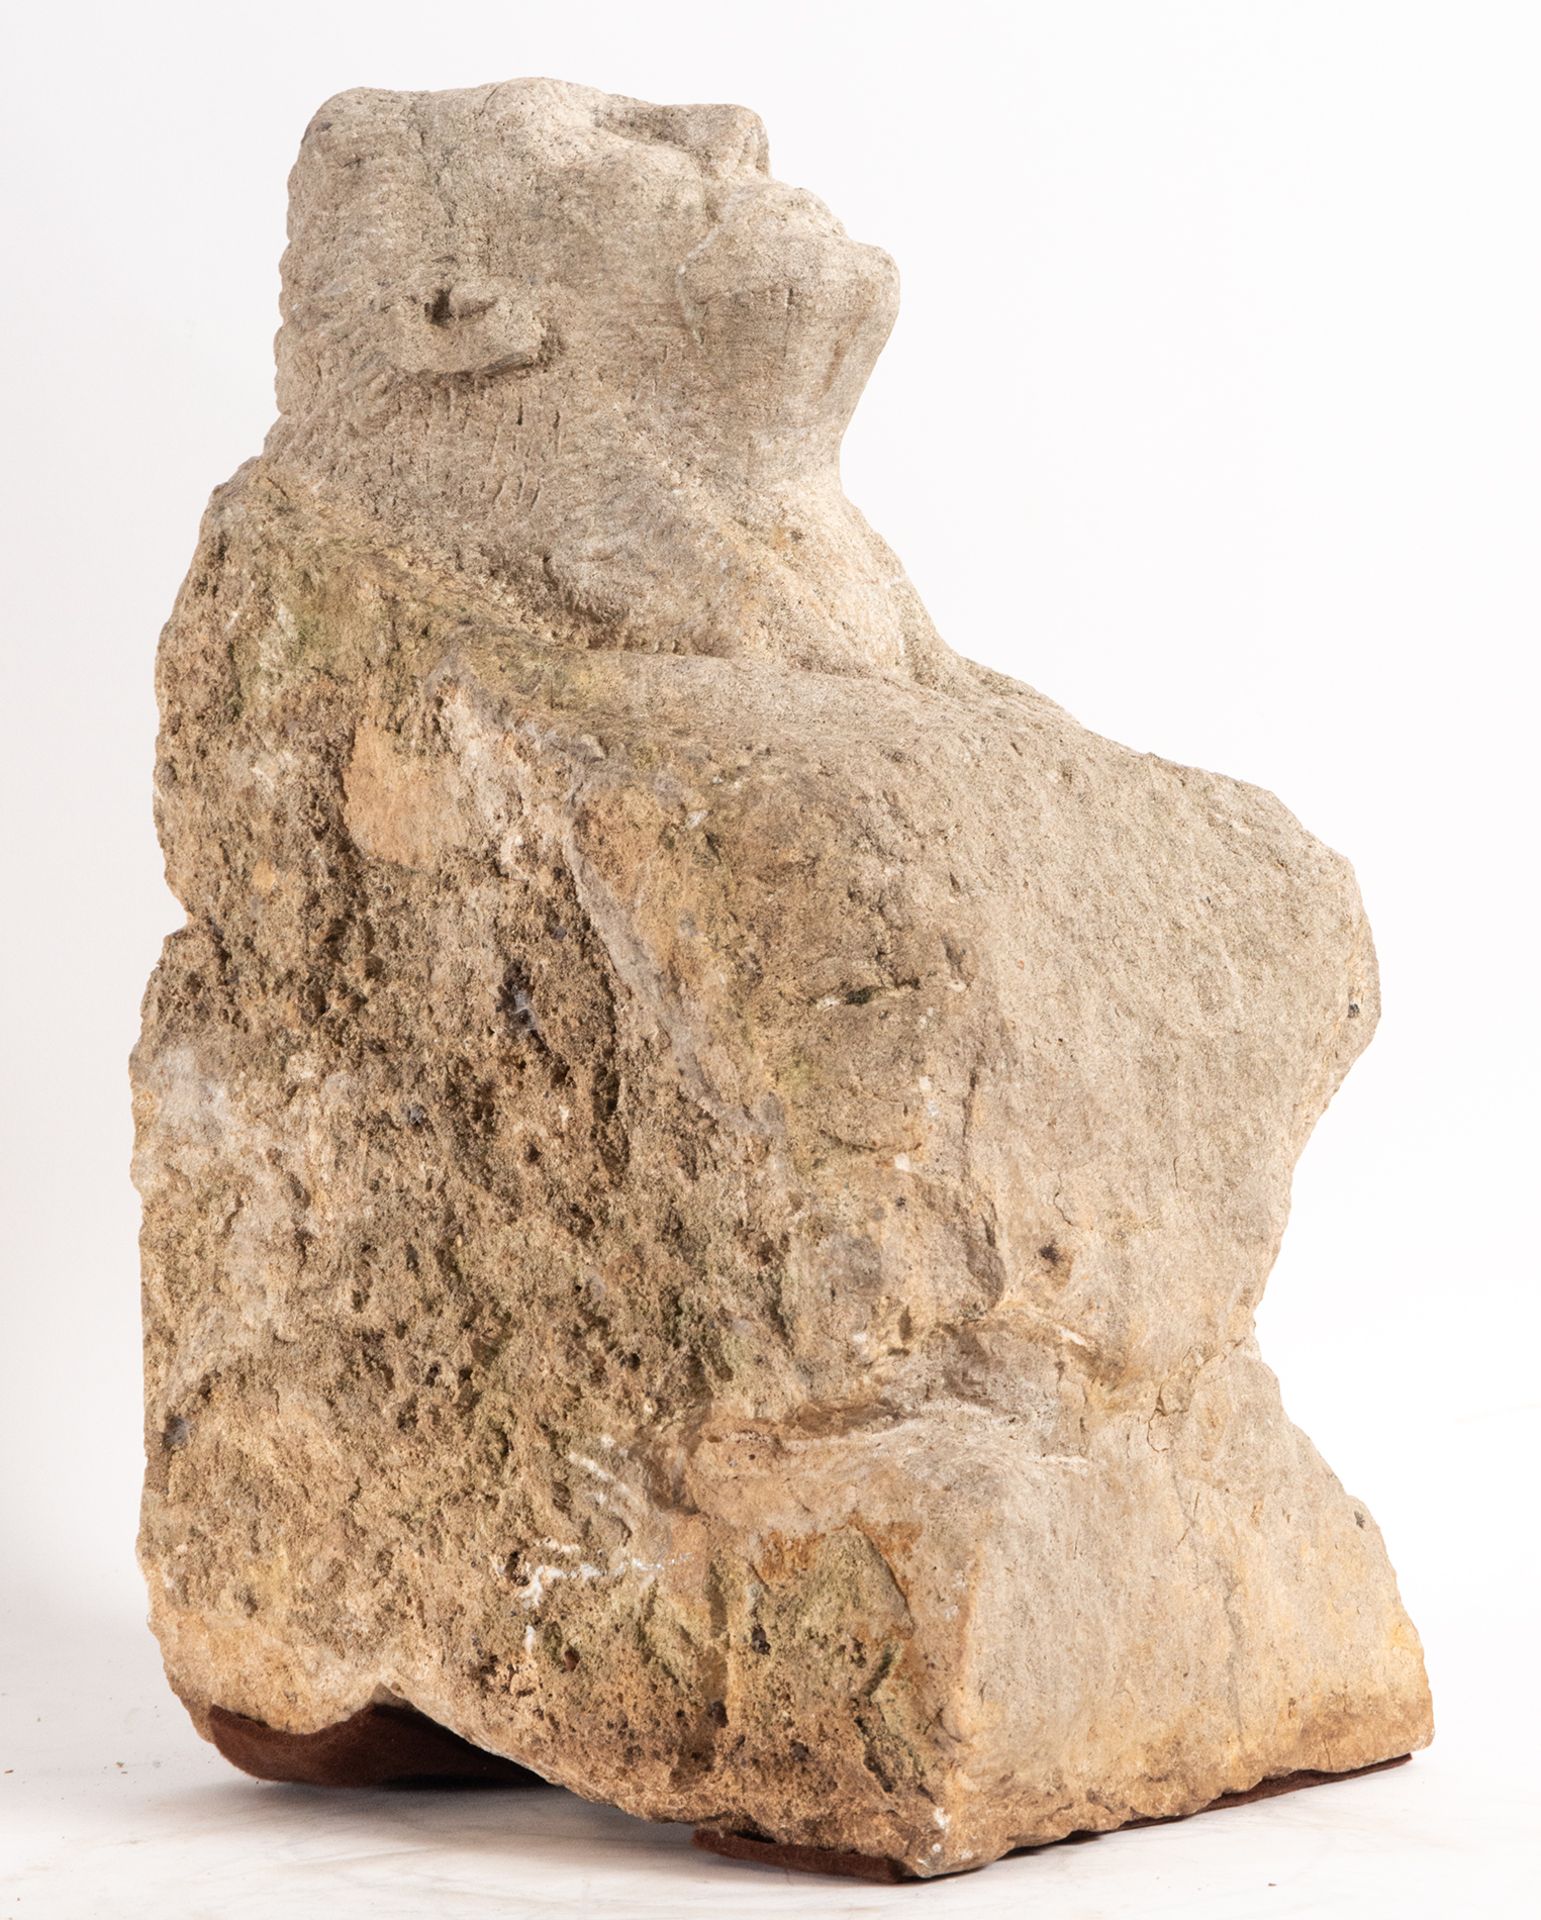 Gothic Gargoyle in stone, 14th - 15th centuries - Image 3 of 4